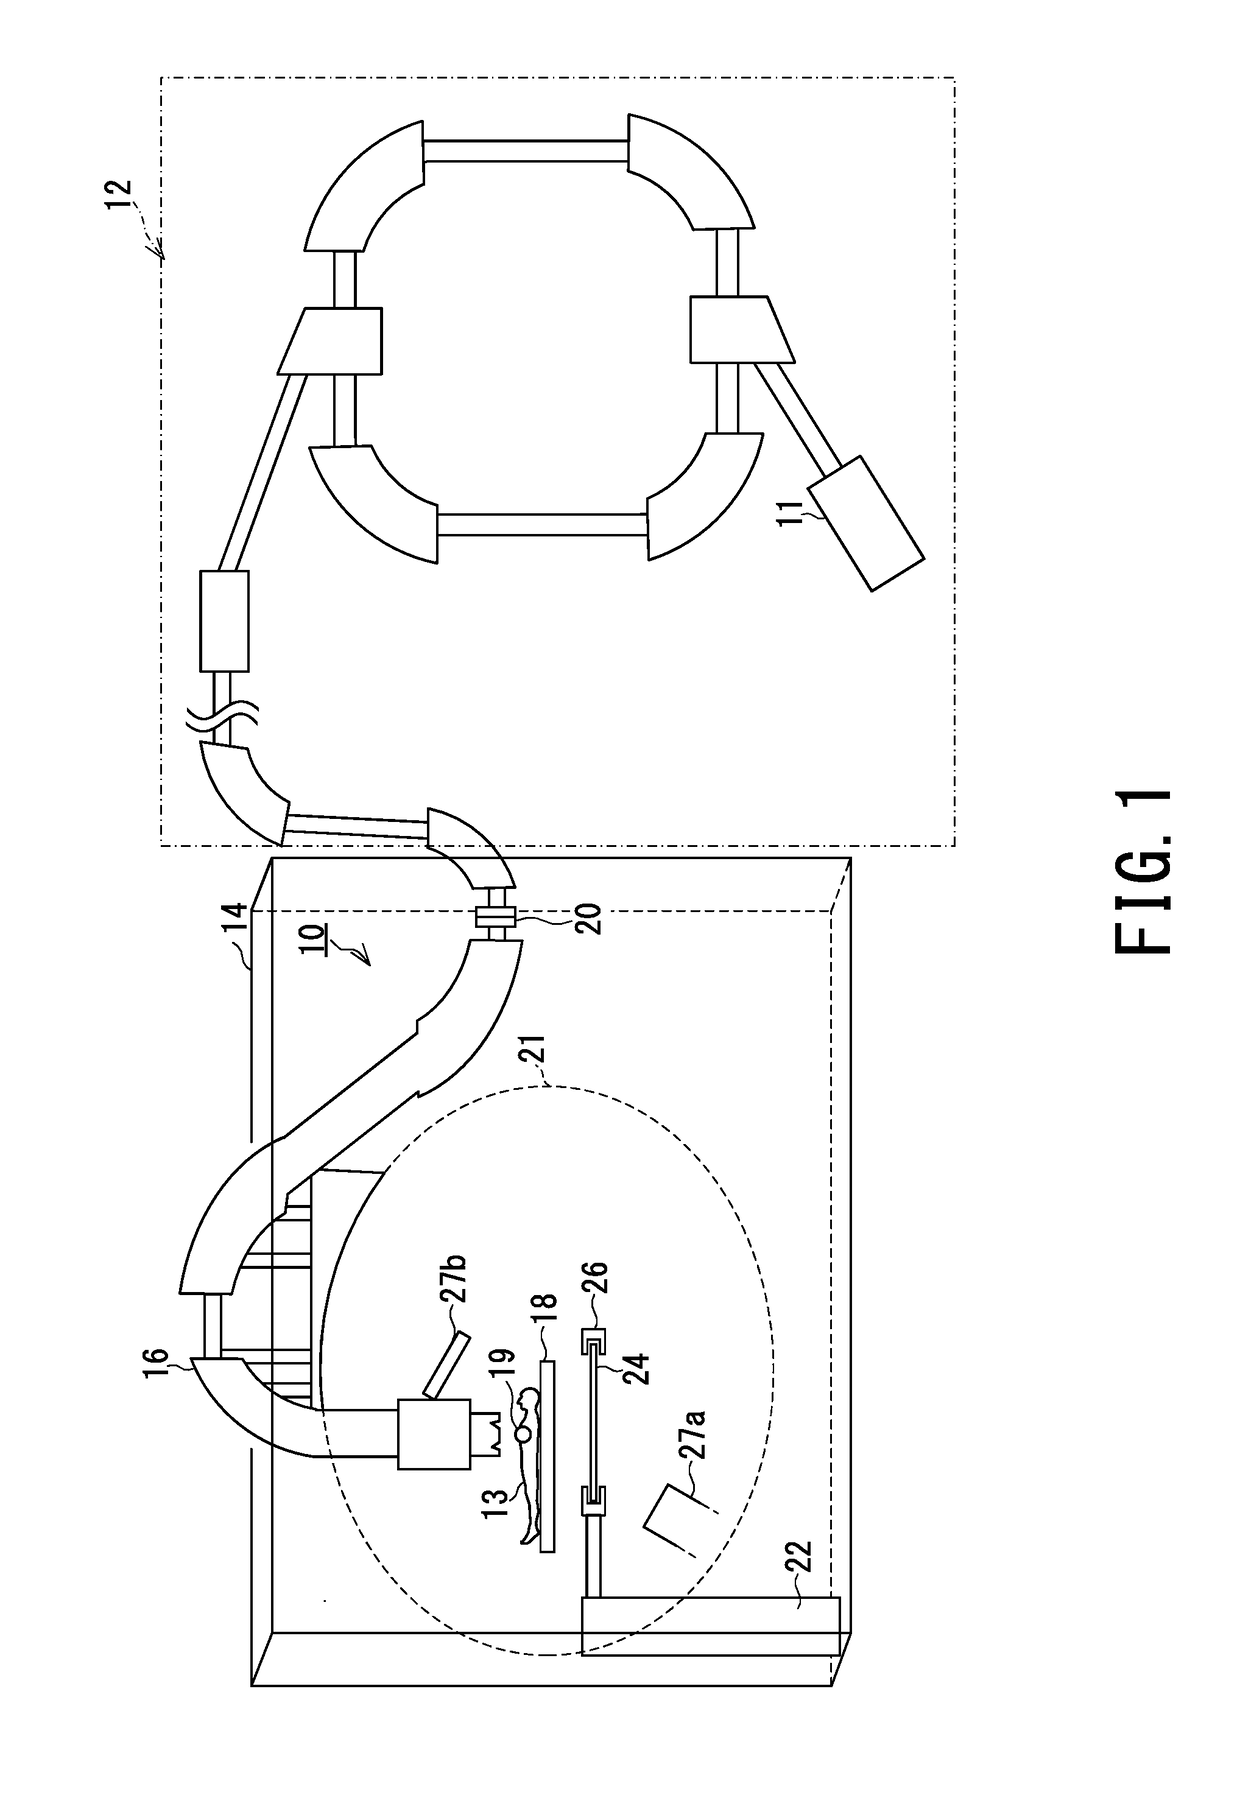 Particle beam therapy apparatus